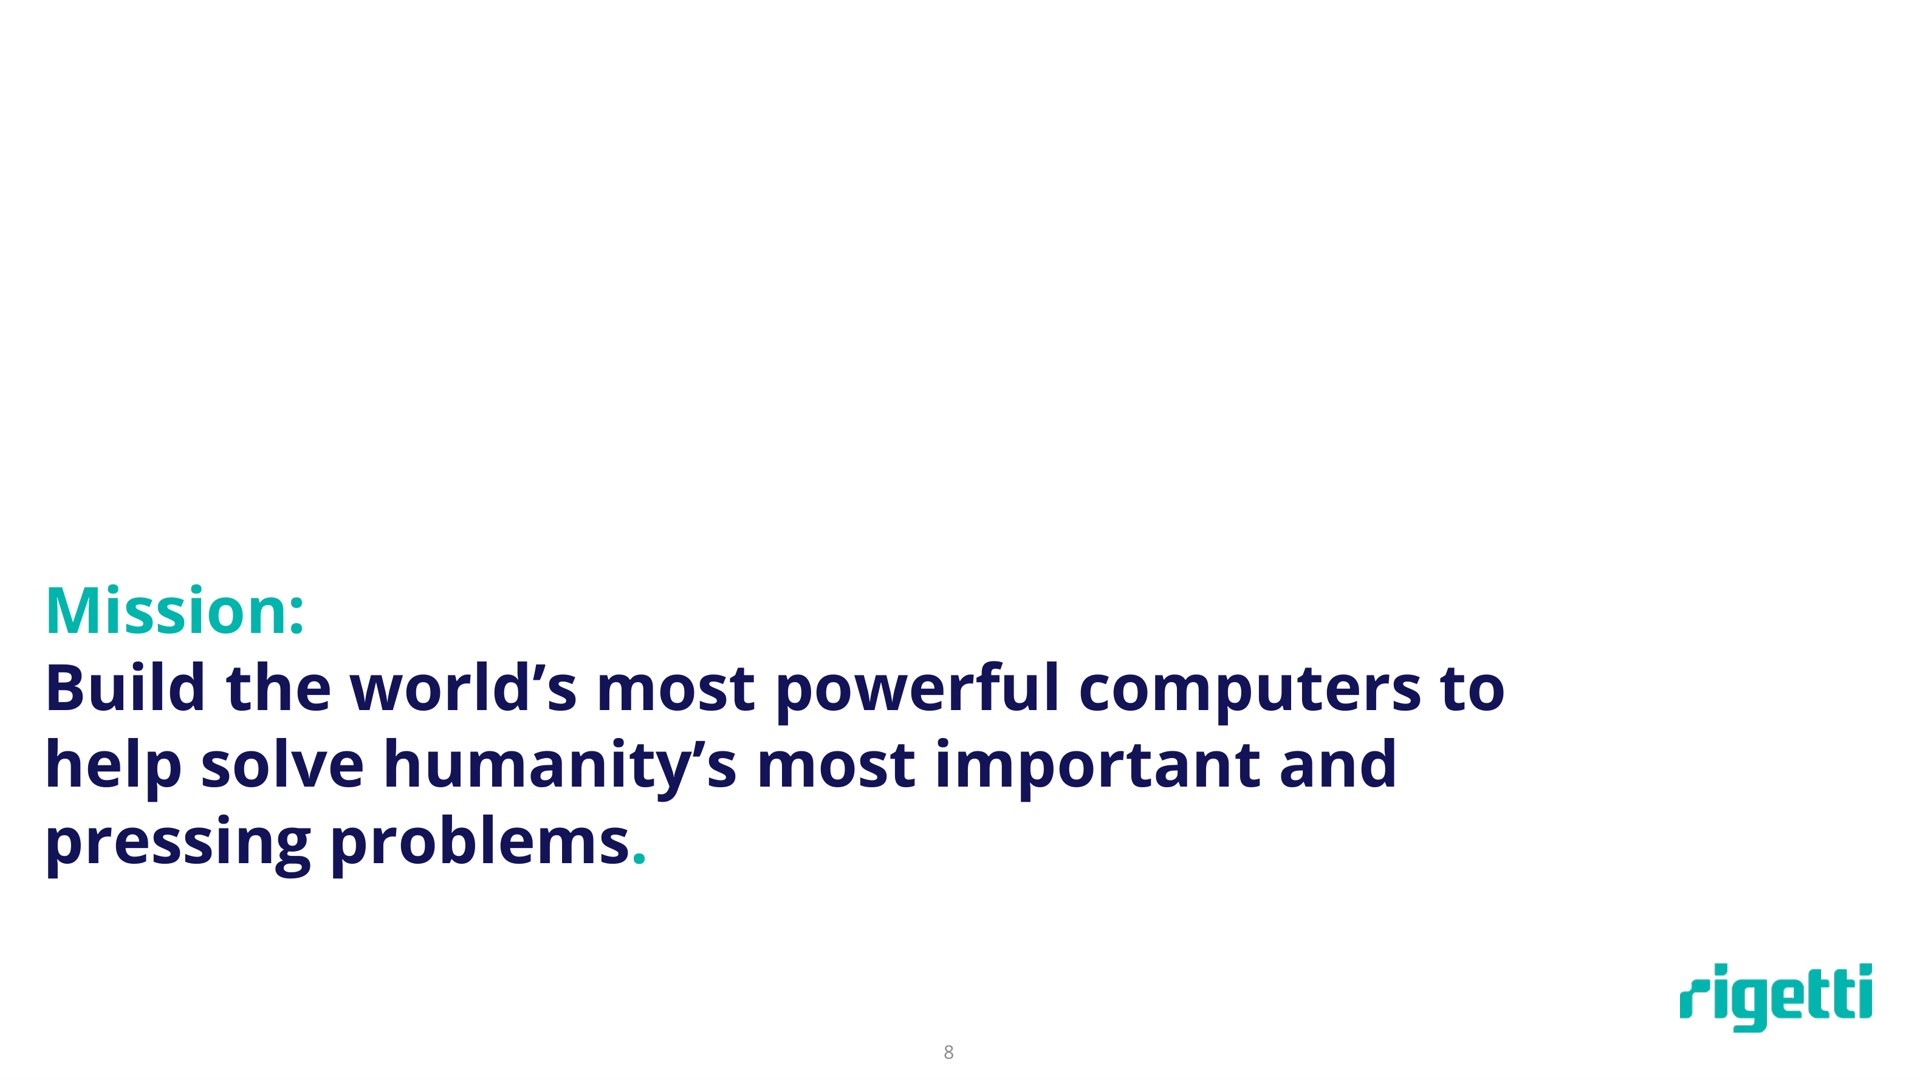 mission build the world most powerful computers to help solve humanity most important and pressing problems | Rigetti